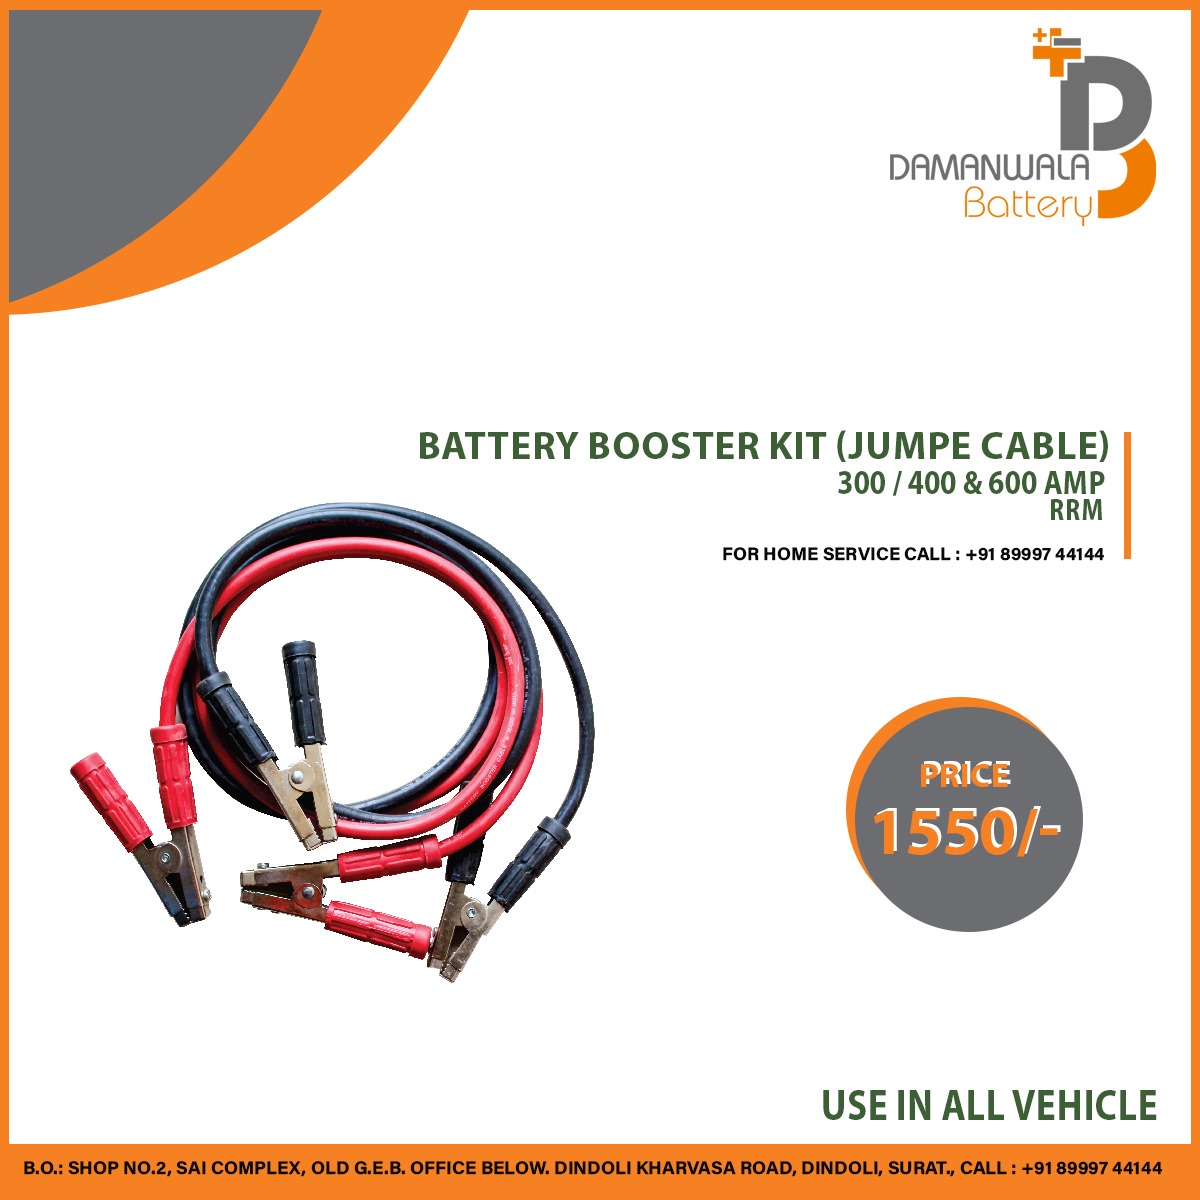 BATTERY BOOSTER KIT (Jumper Cable) 300,400 and 600AMP RRM